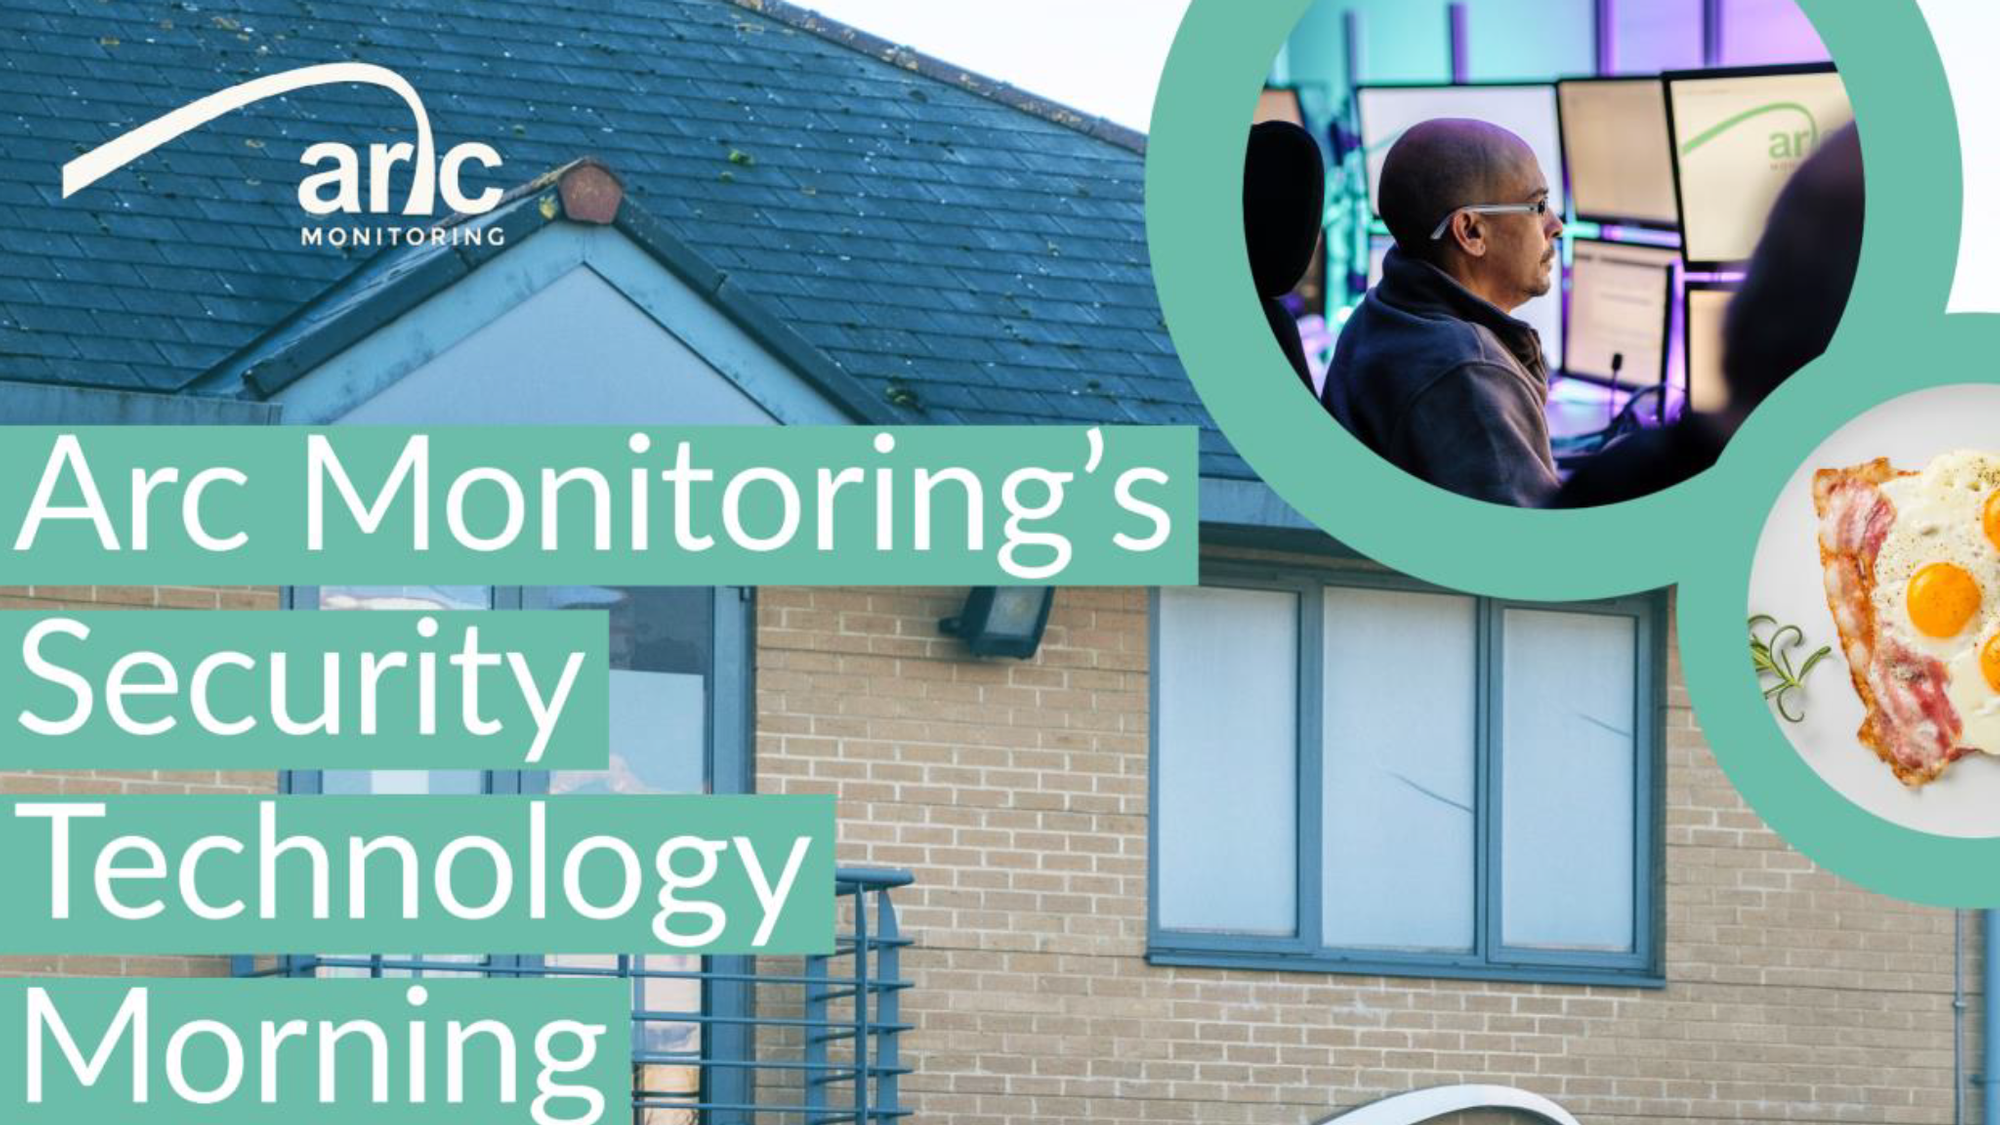 Arc Monitoring to Host a Security Technology Morning